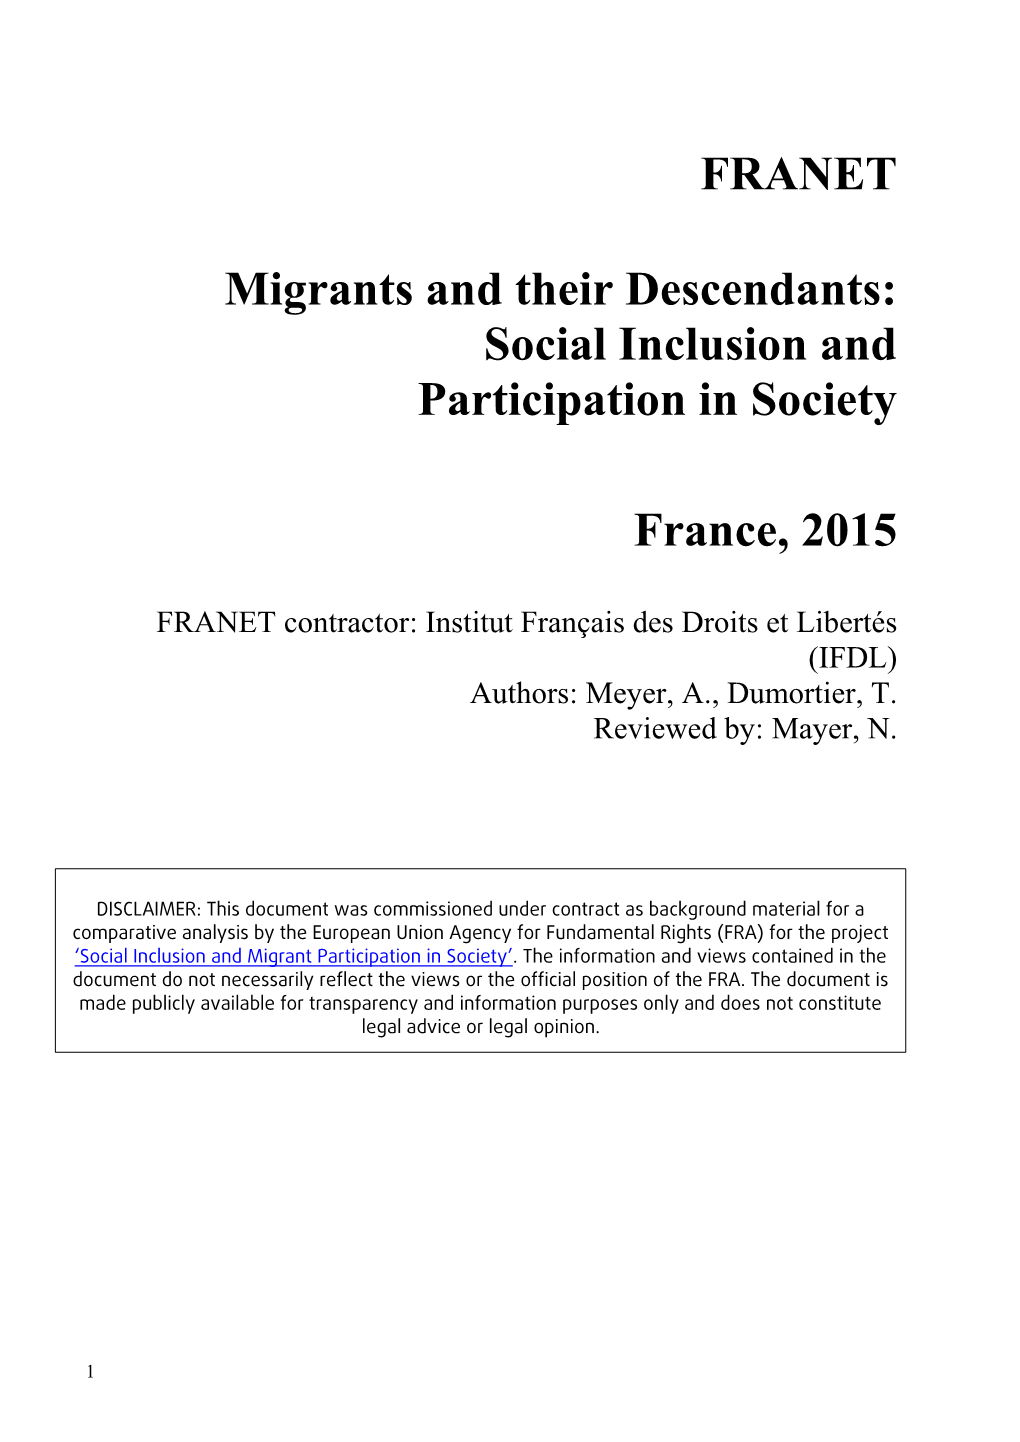 Migrants and Their Descendants: Social Inclusion and Participation in Society